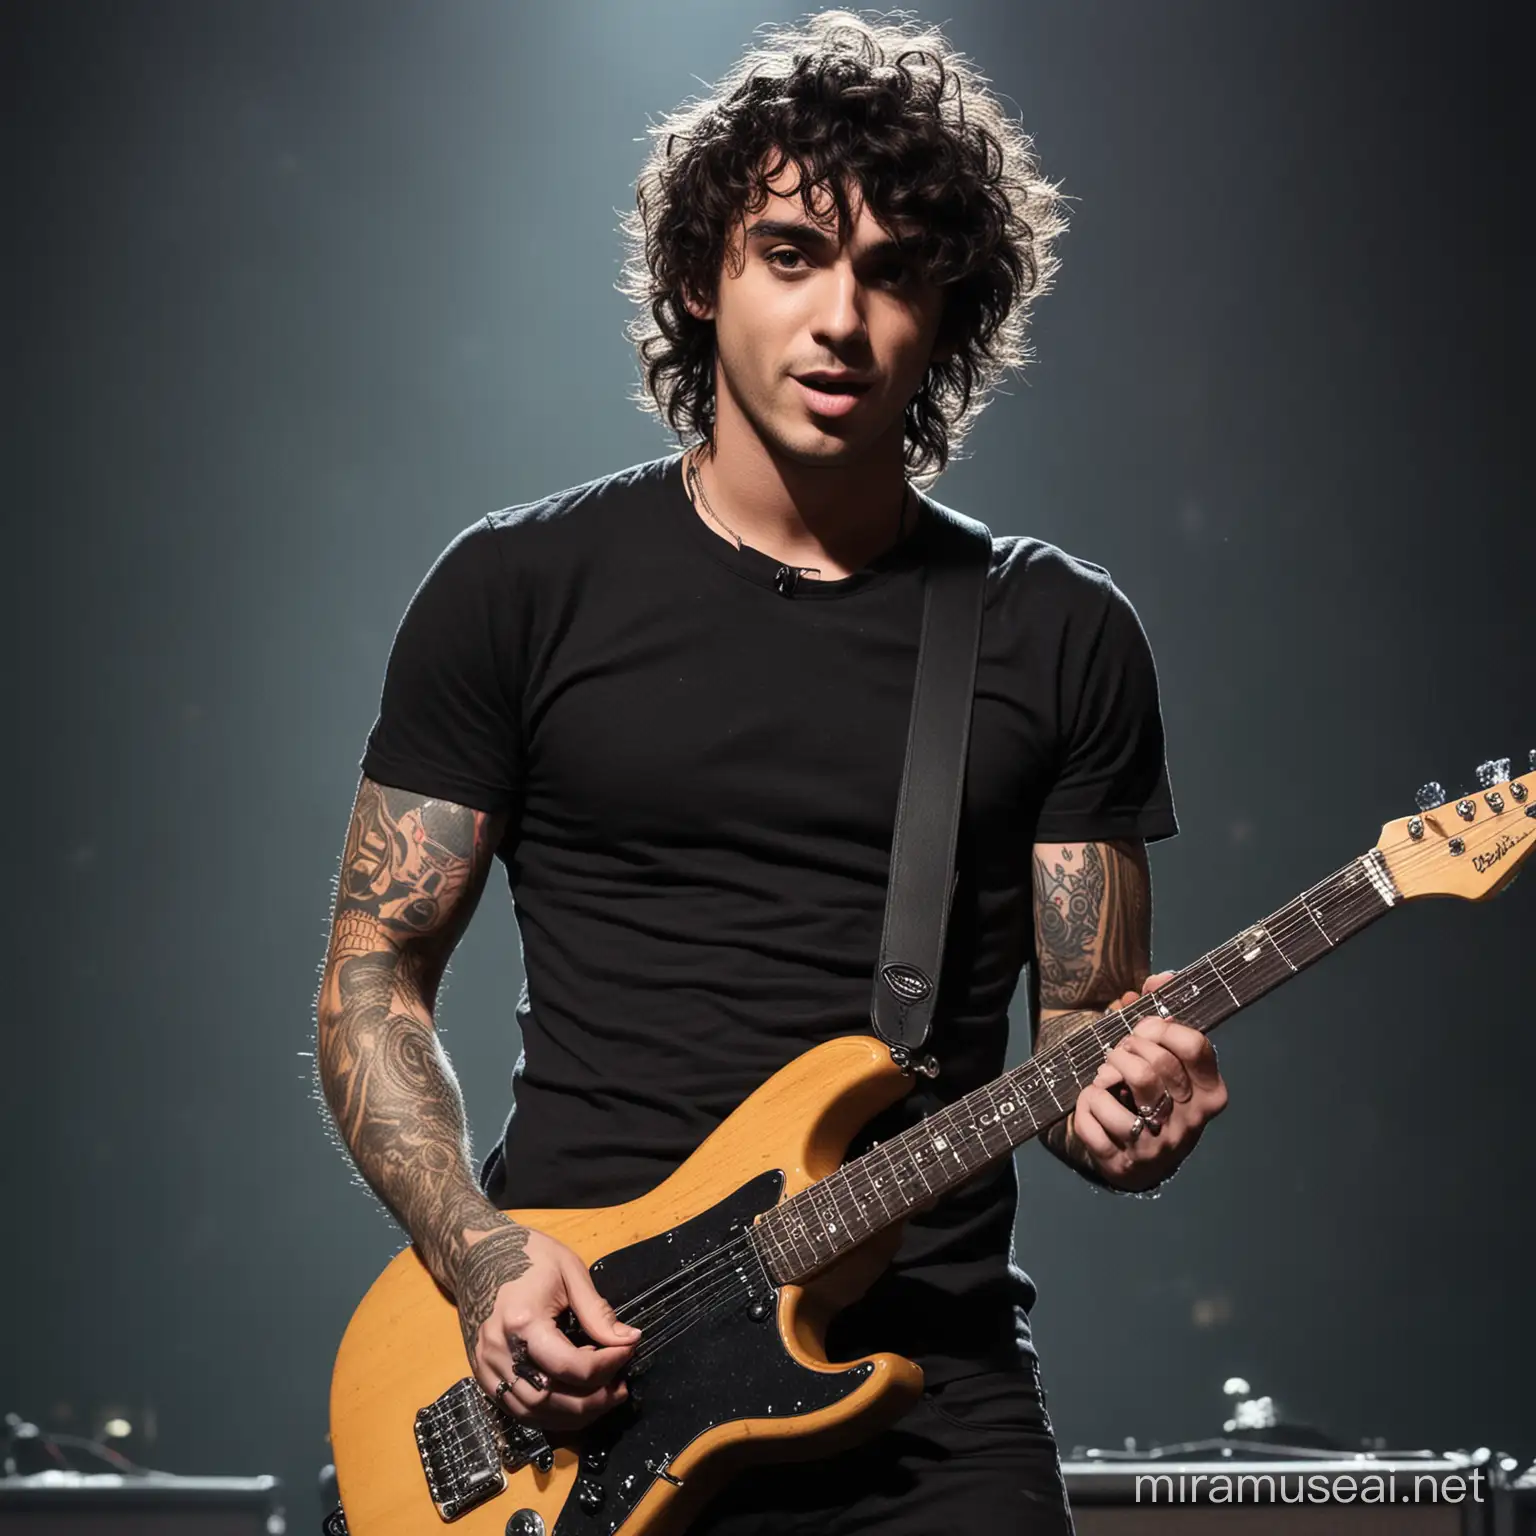 Generate an image of a front man of a rock band, he looks like a combination of Taylor York and Oli Sykes, he has dark curly hair, he is muscular but lean, he plays guitar, he is on stage,